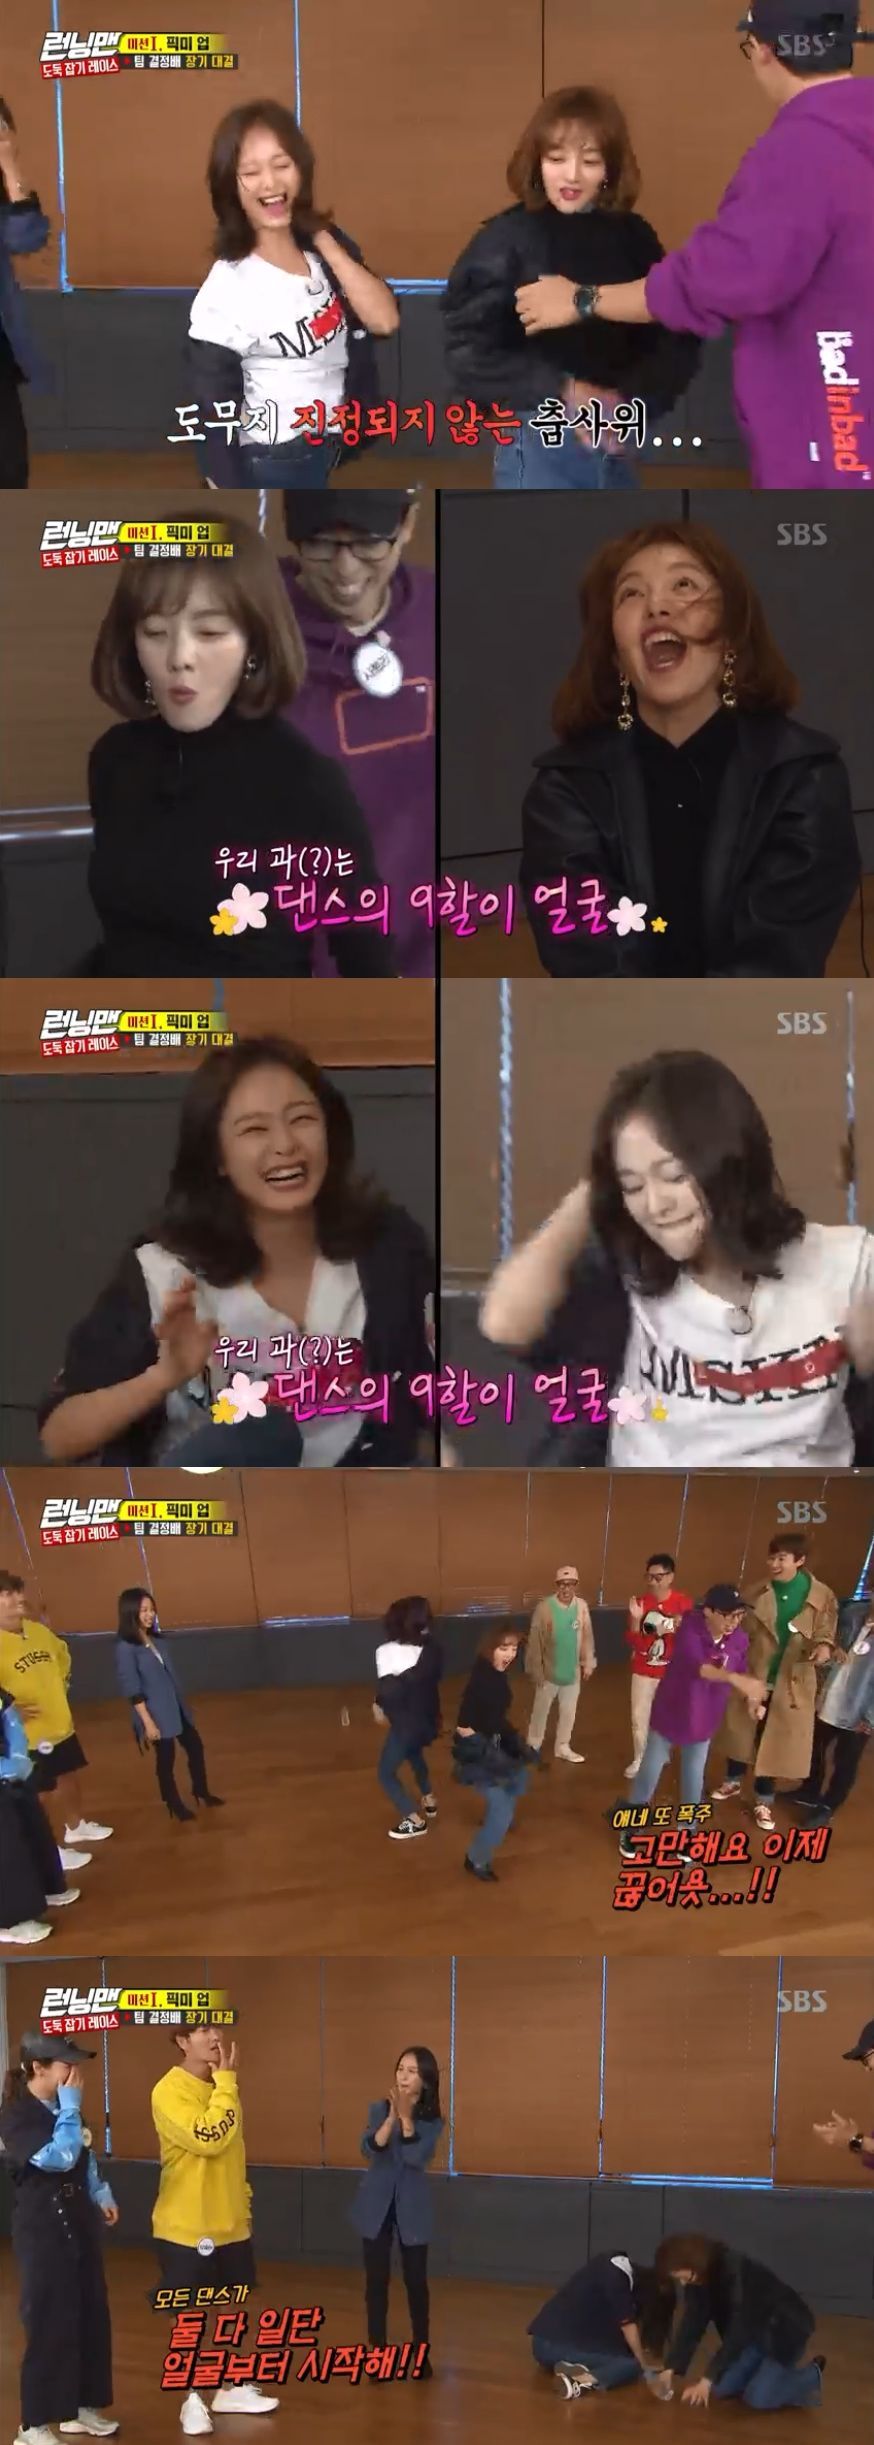 On SBSs Running Man, which aired on the 27th, Gon Min-si, Hwang Bo Ra, appeared as a guest; members who had a dance battle with a pre-mission.Jeon So-min showed off her sexy dance in a motivated way.Hwang Bo Ra and Jeon So-min brought up the heat with joint dance; as they performed their own style, Yoo Jae-Suk and Lee Kwang-soo were also embarrassed.Kim Jong-guk pointed out the dance that resembled both of them start with their faces. Yoo Jae-Suk tongued out the uncontrollable dance passion, saying, Its the worst.